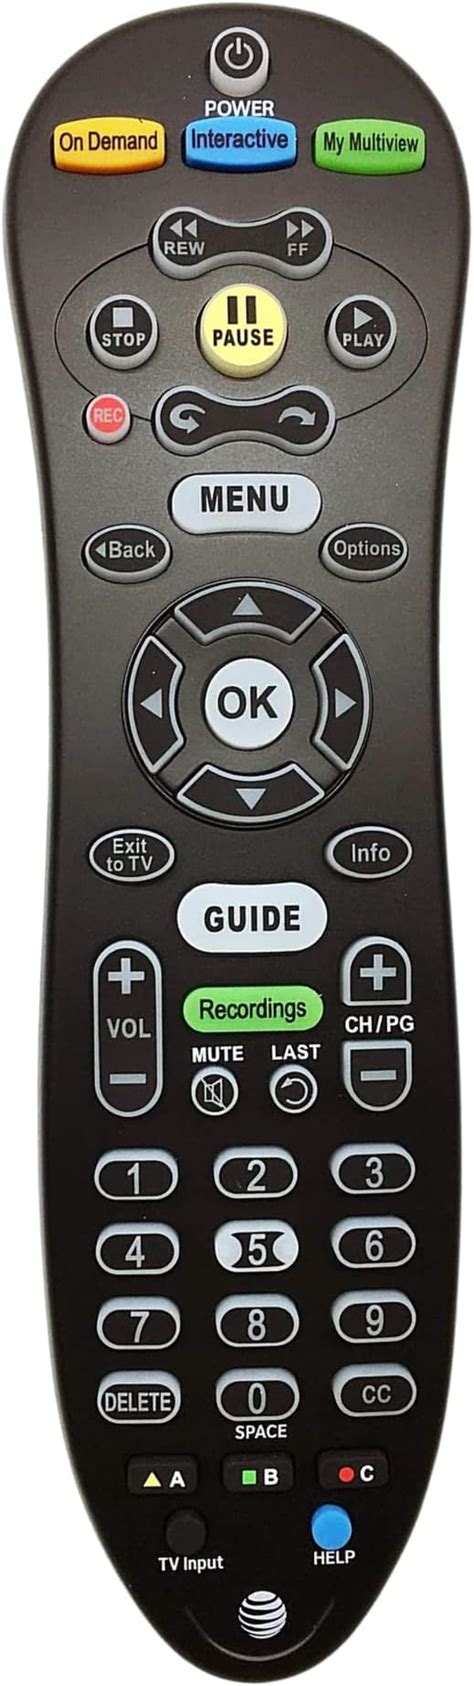 Program uverse remote. Program uverse remote to Soundbar. Is there a way to program the uverse remote to our soundbar? It’s a Samsung sound bar! TIA. Questions ... 